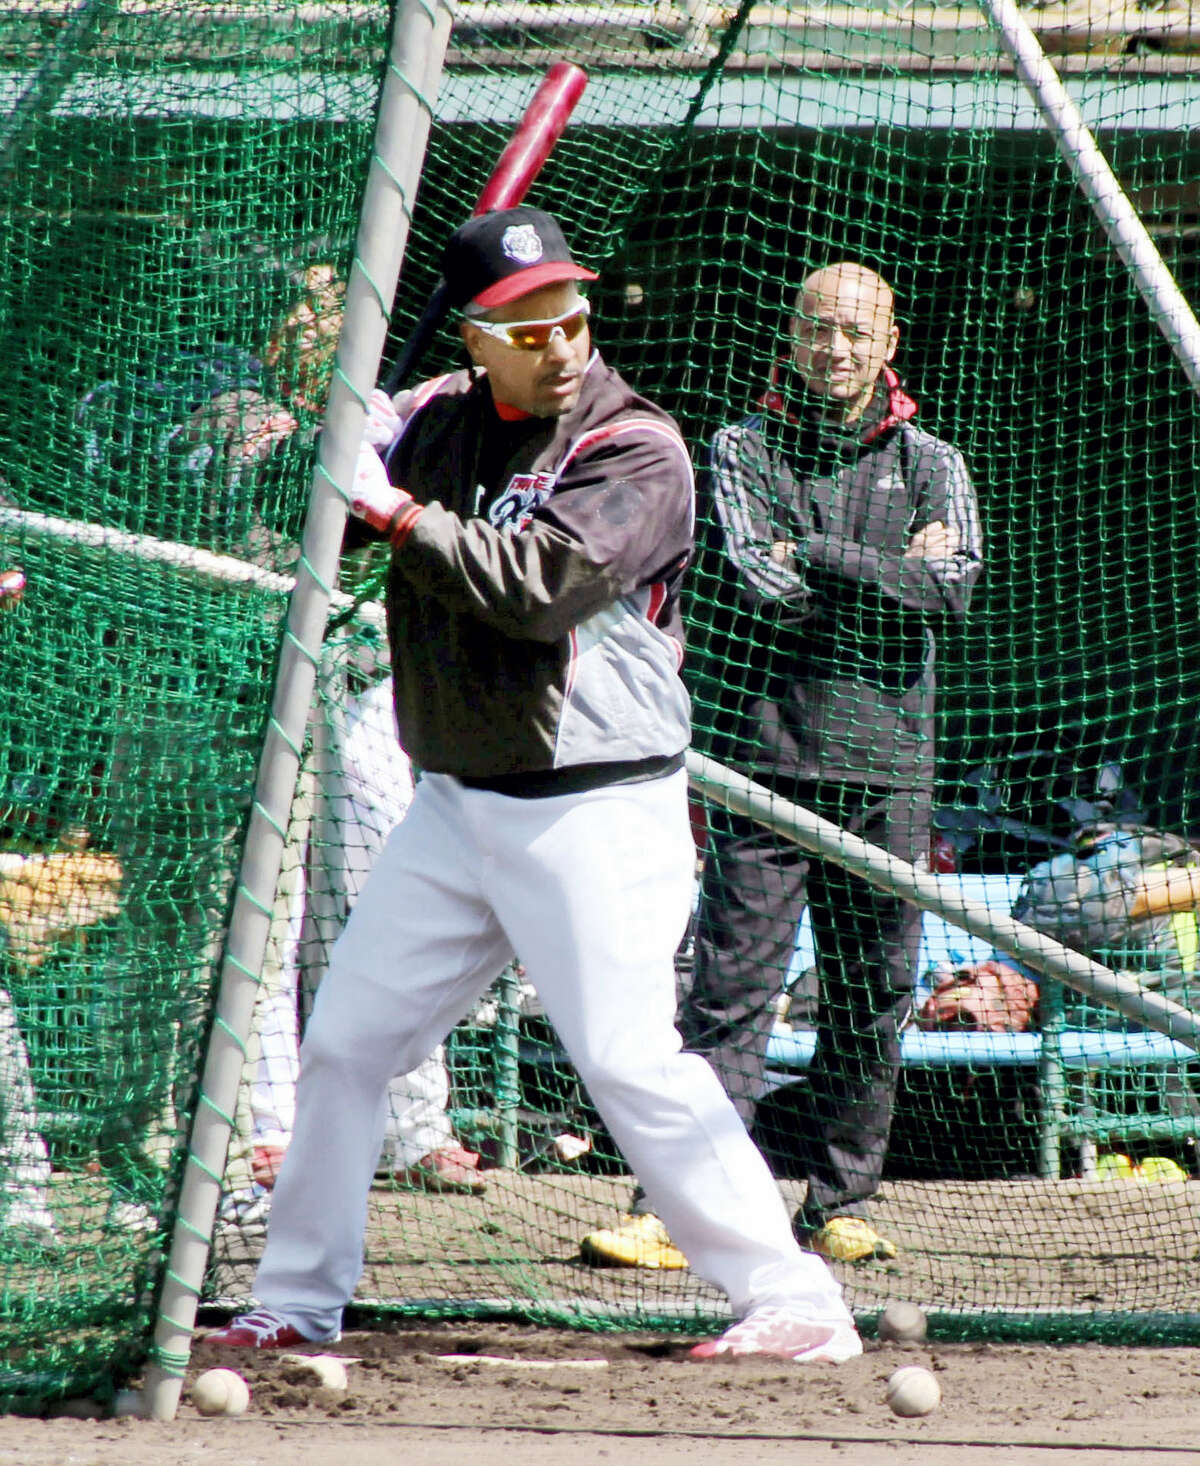 Manny Ramirez' new home a far cry from bright lights of Tokyo